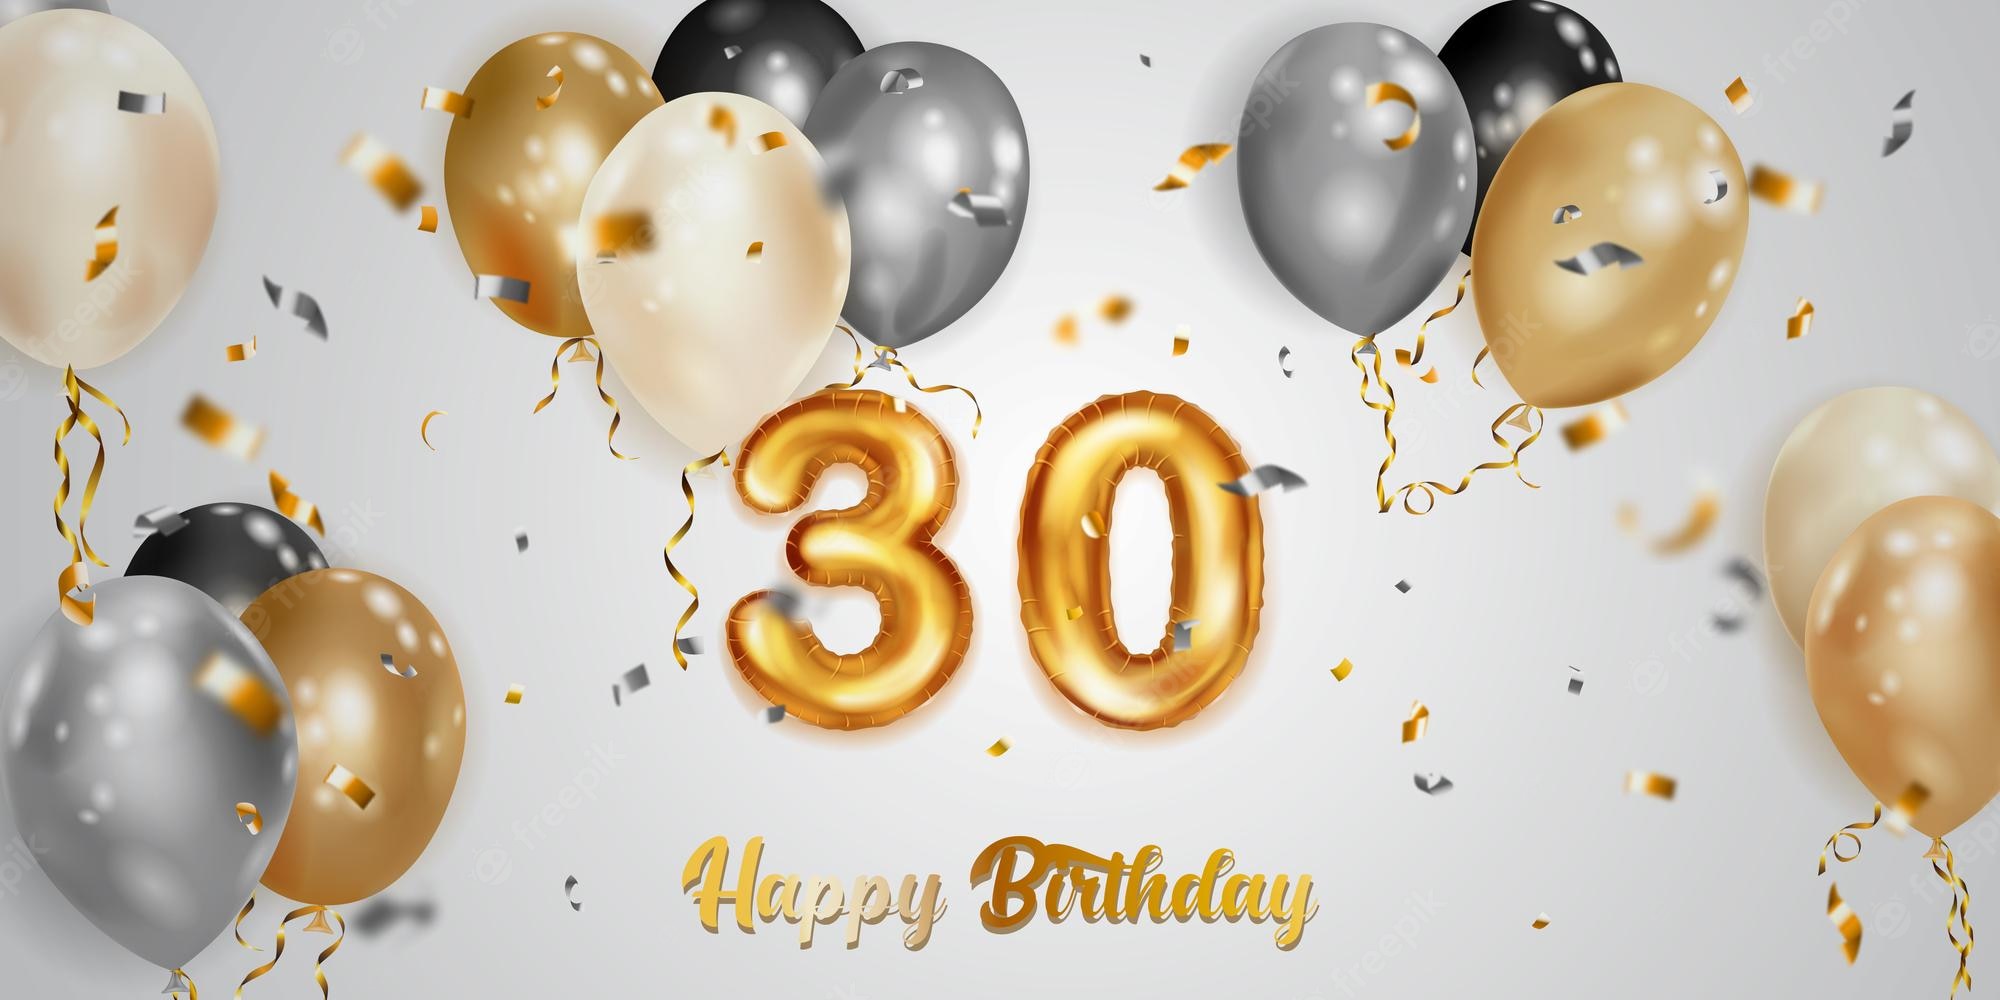 Premium Vector. Festive birthday illustration with white black and gold helium balloons big number 30 golden foil balloon flying shiny pieces of serpentine and inscription happy birthday on light background